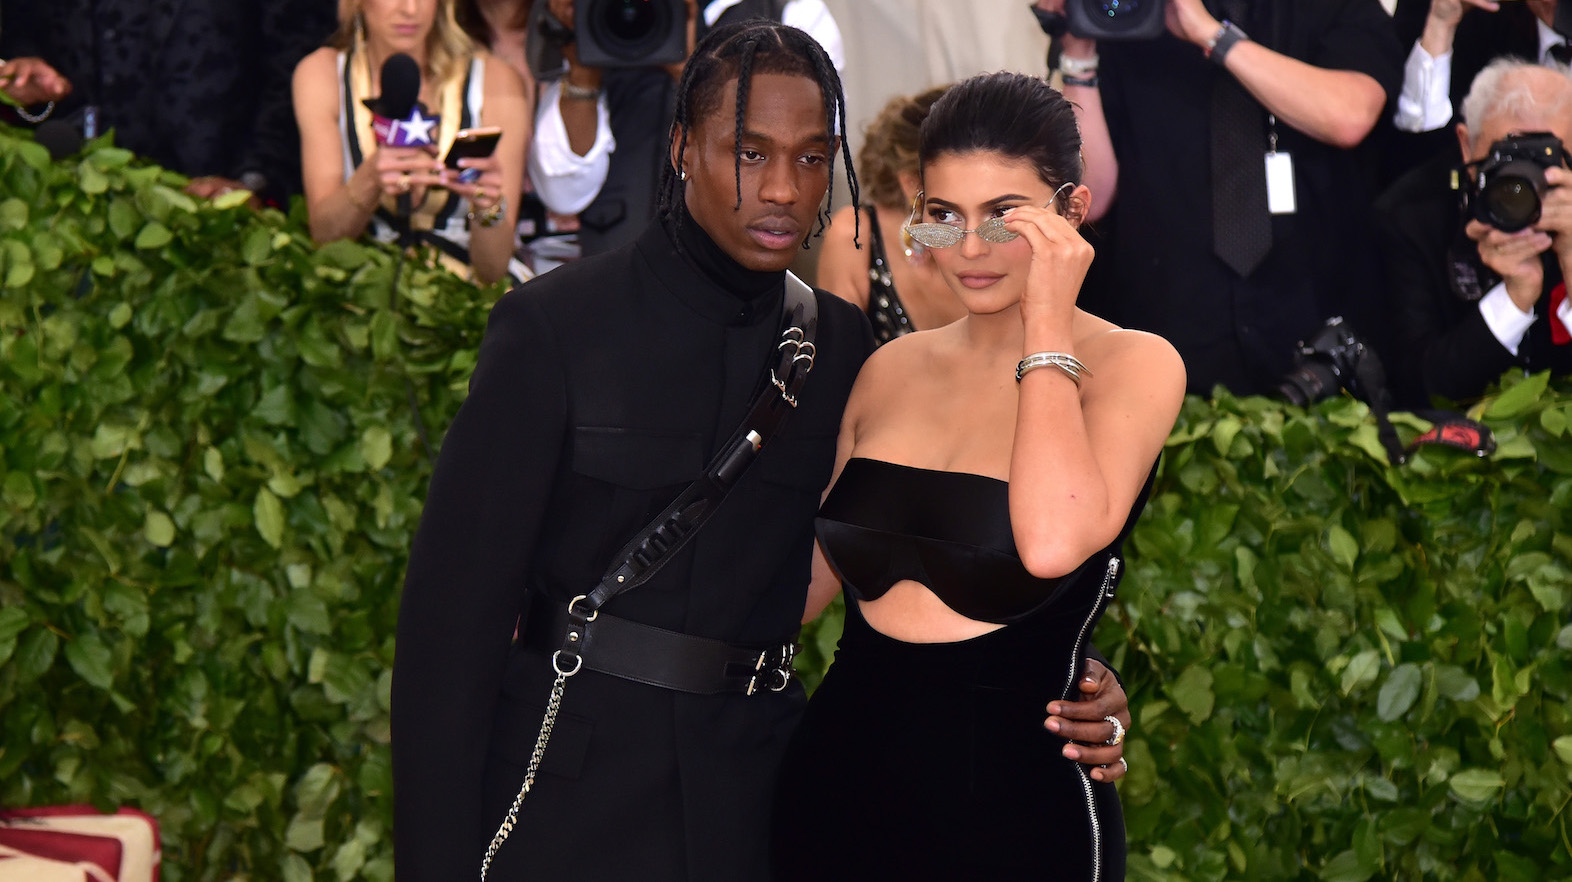 Pornhub Comments on Instagram Pic of Kylie Jenner and Travis Scott